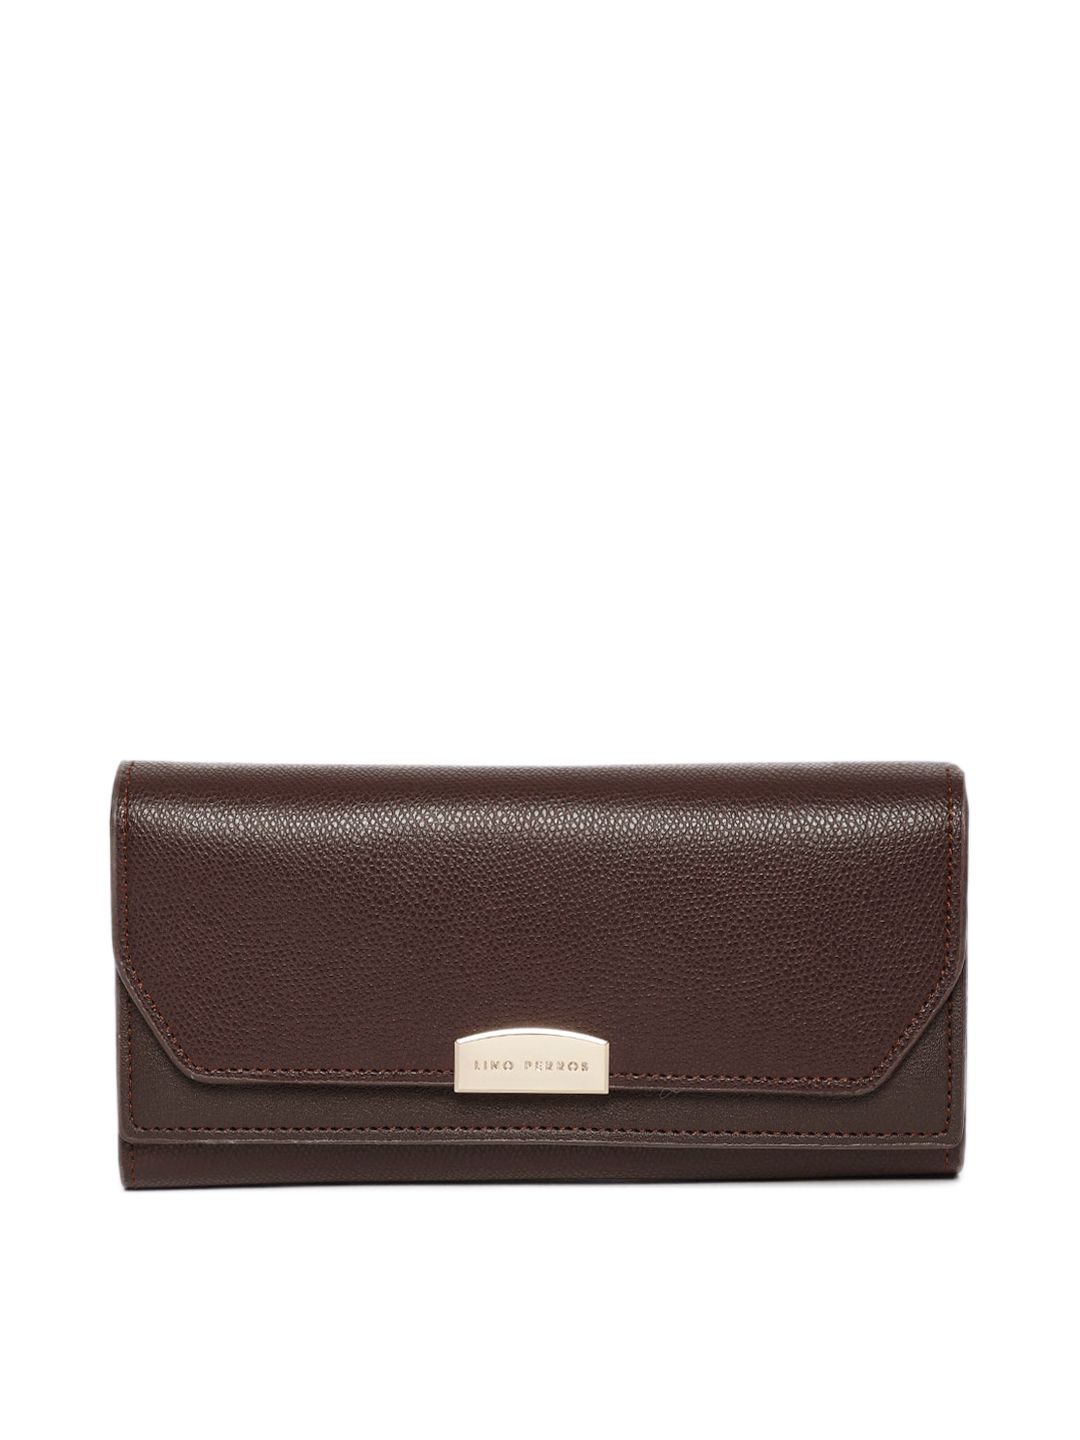 Lino Perros Women Brown Solid Three Fold Wallet Price in India